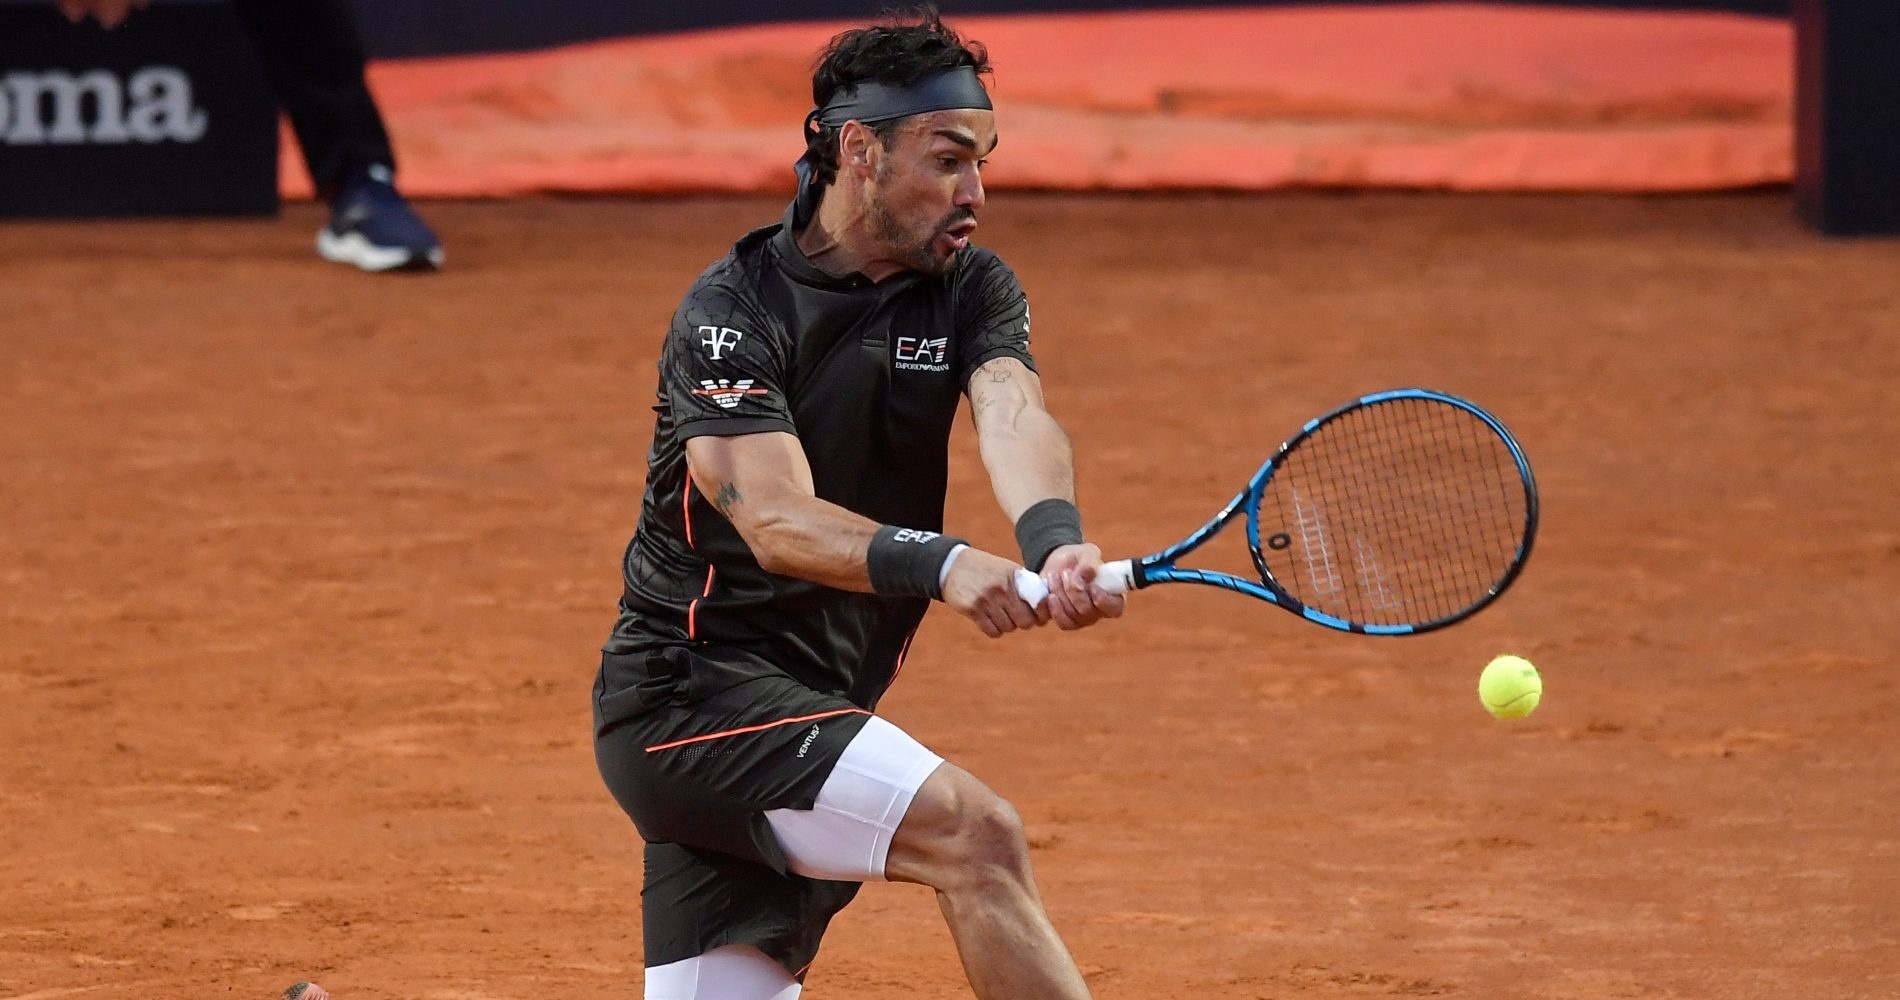 May 10, 2023, ROME: Fabio Fognini of Italy in action during his men's  singles first round match against Andy Murray of Britain (not pictured) at  the Italian Open tennis tournament in Rome